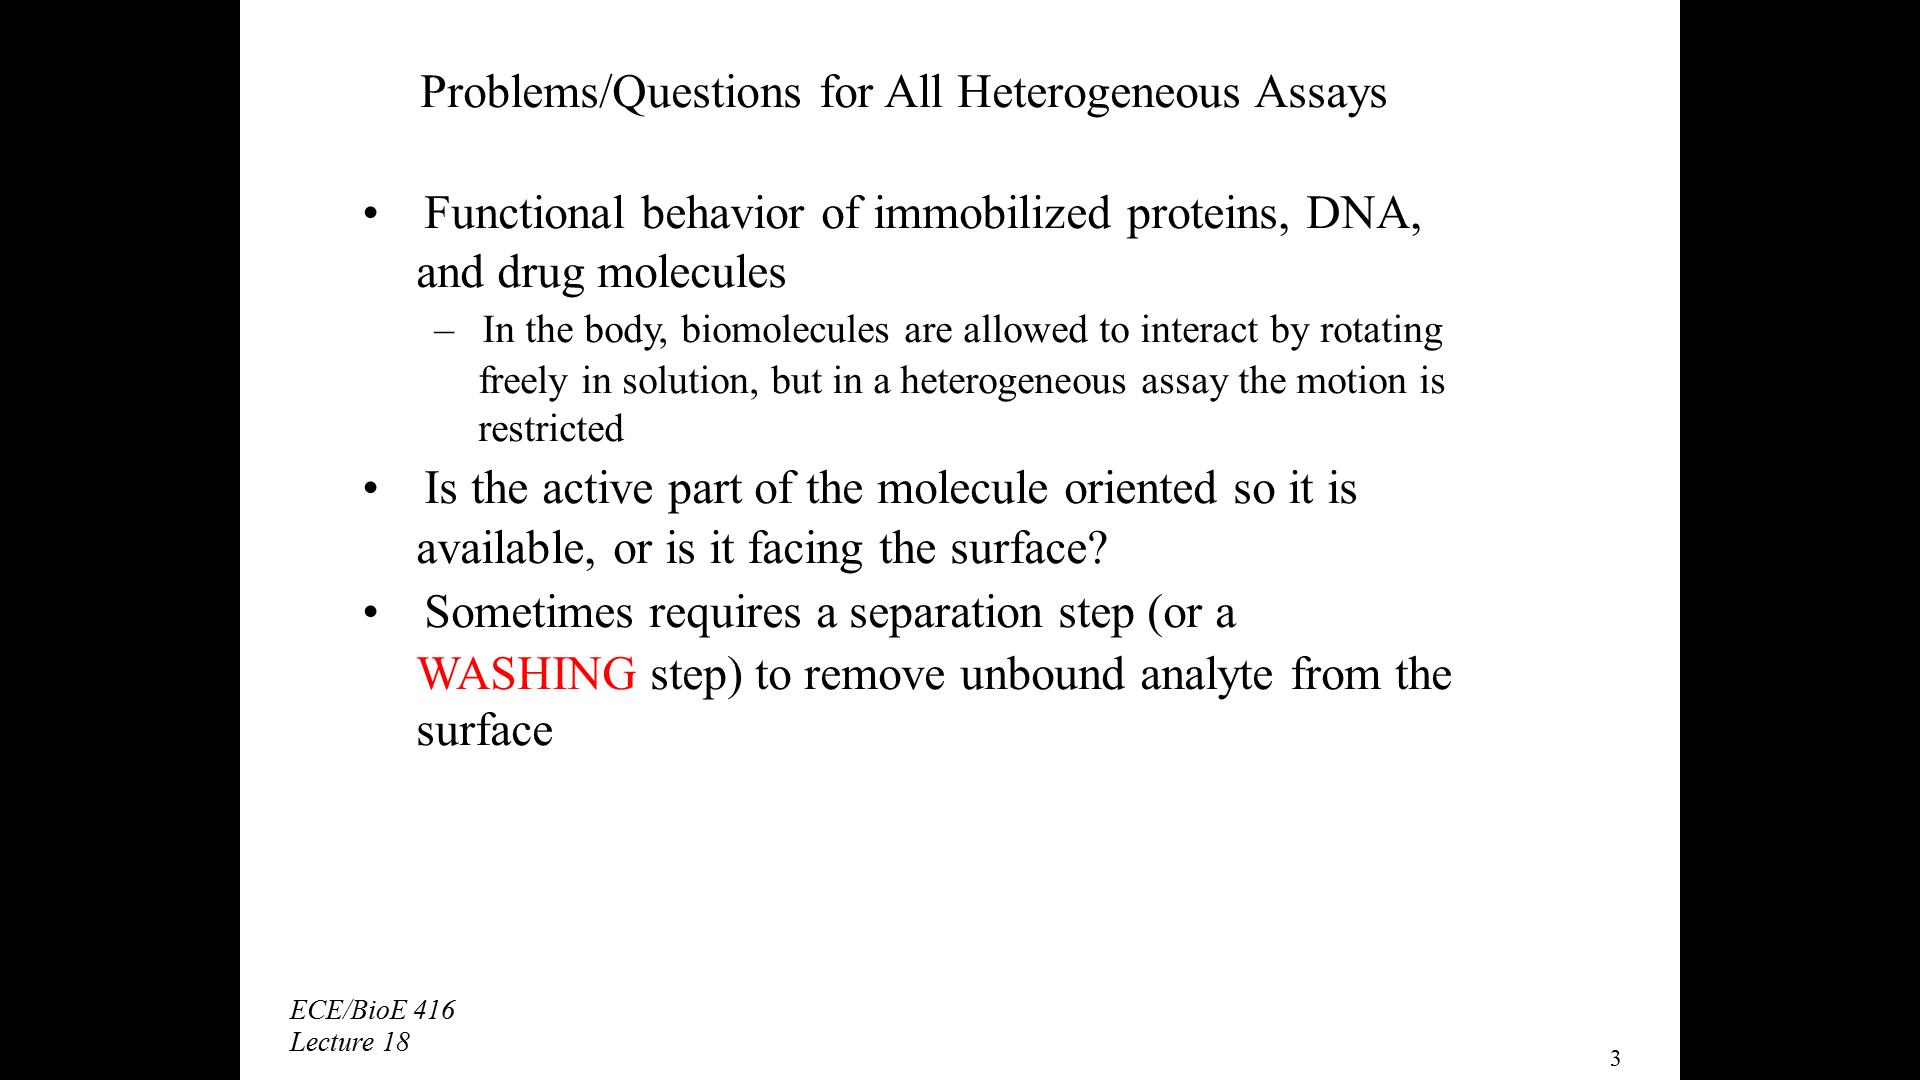 Problems/Questions for All Heterogeneous Assays